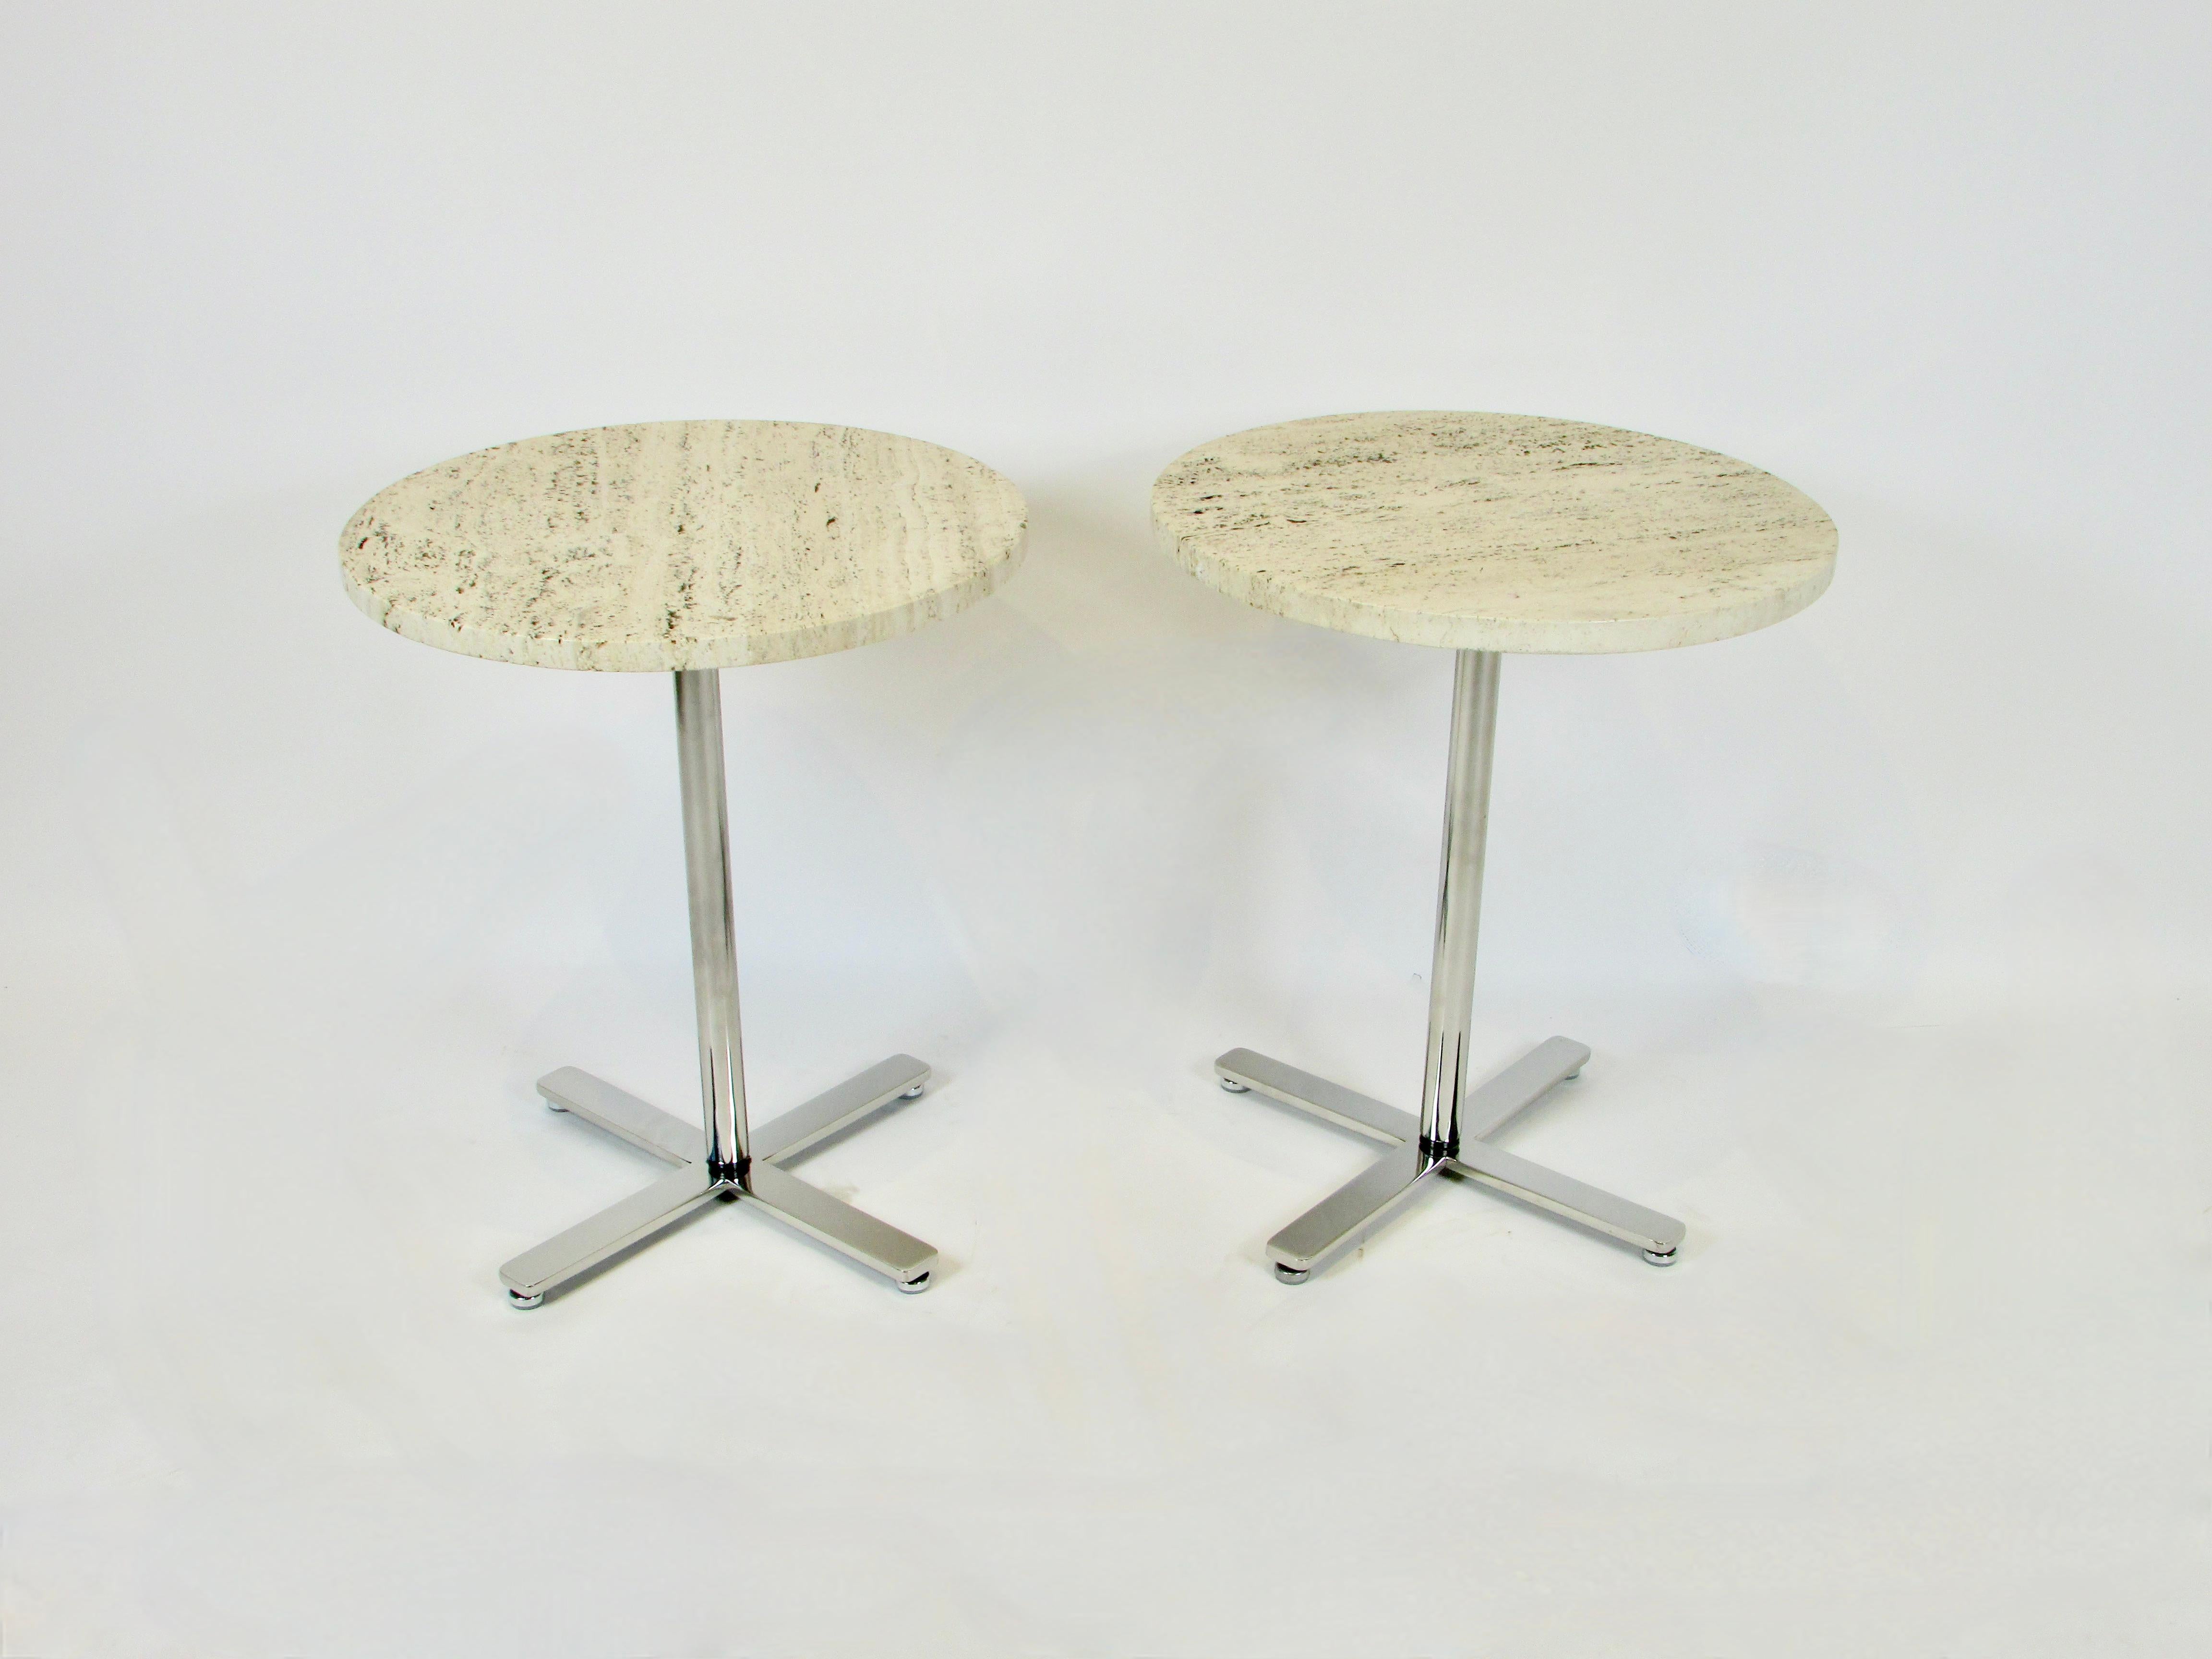 Pair of minimalist side tables manufactured by Helikon Furniture Circa 1970s before the Herman Miller Buy out. Beautiful open grained Travertine marble tops on stainless steel four prong base.